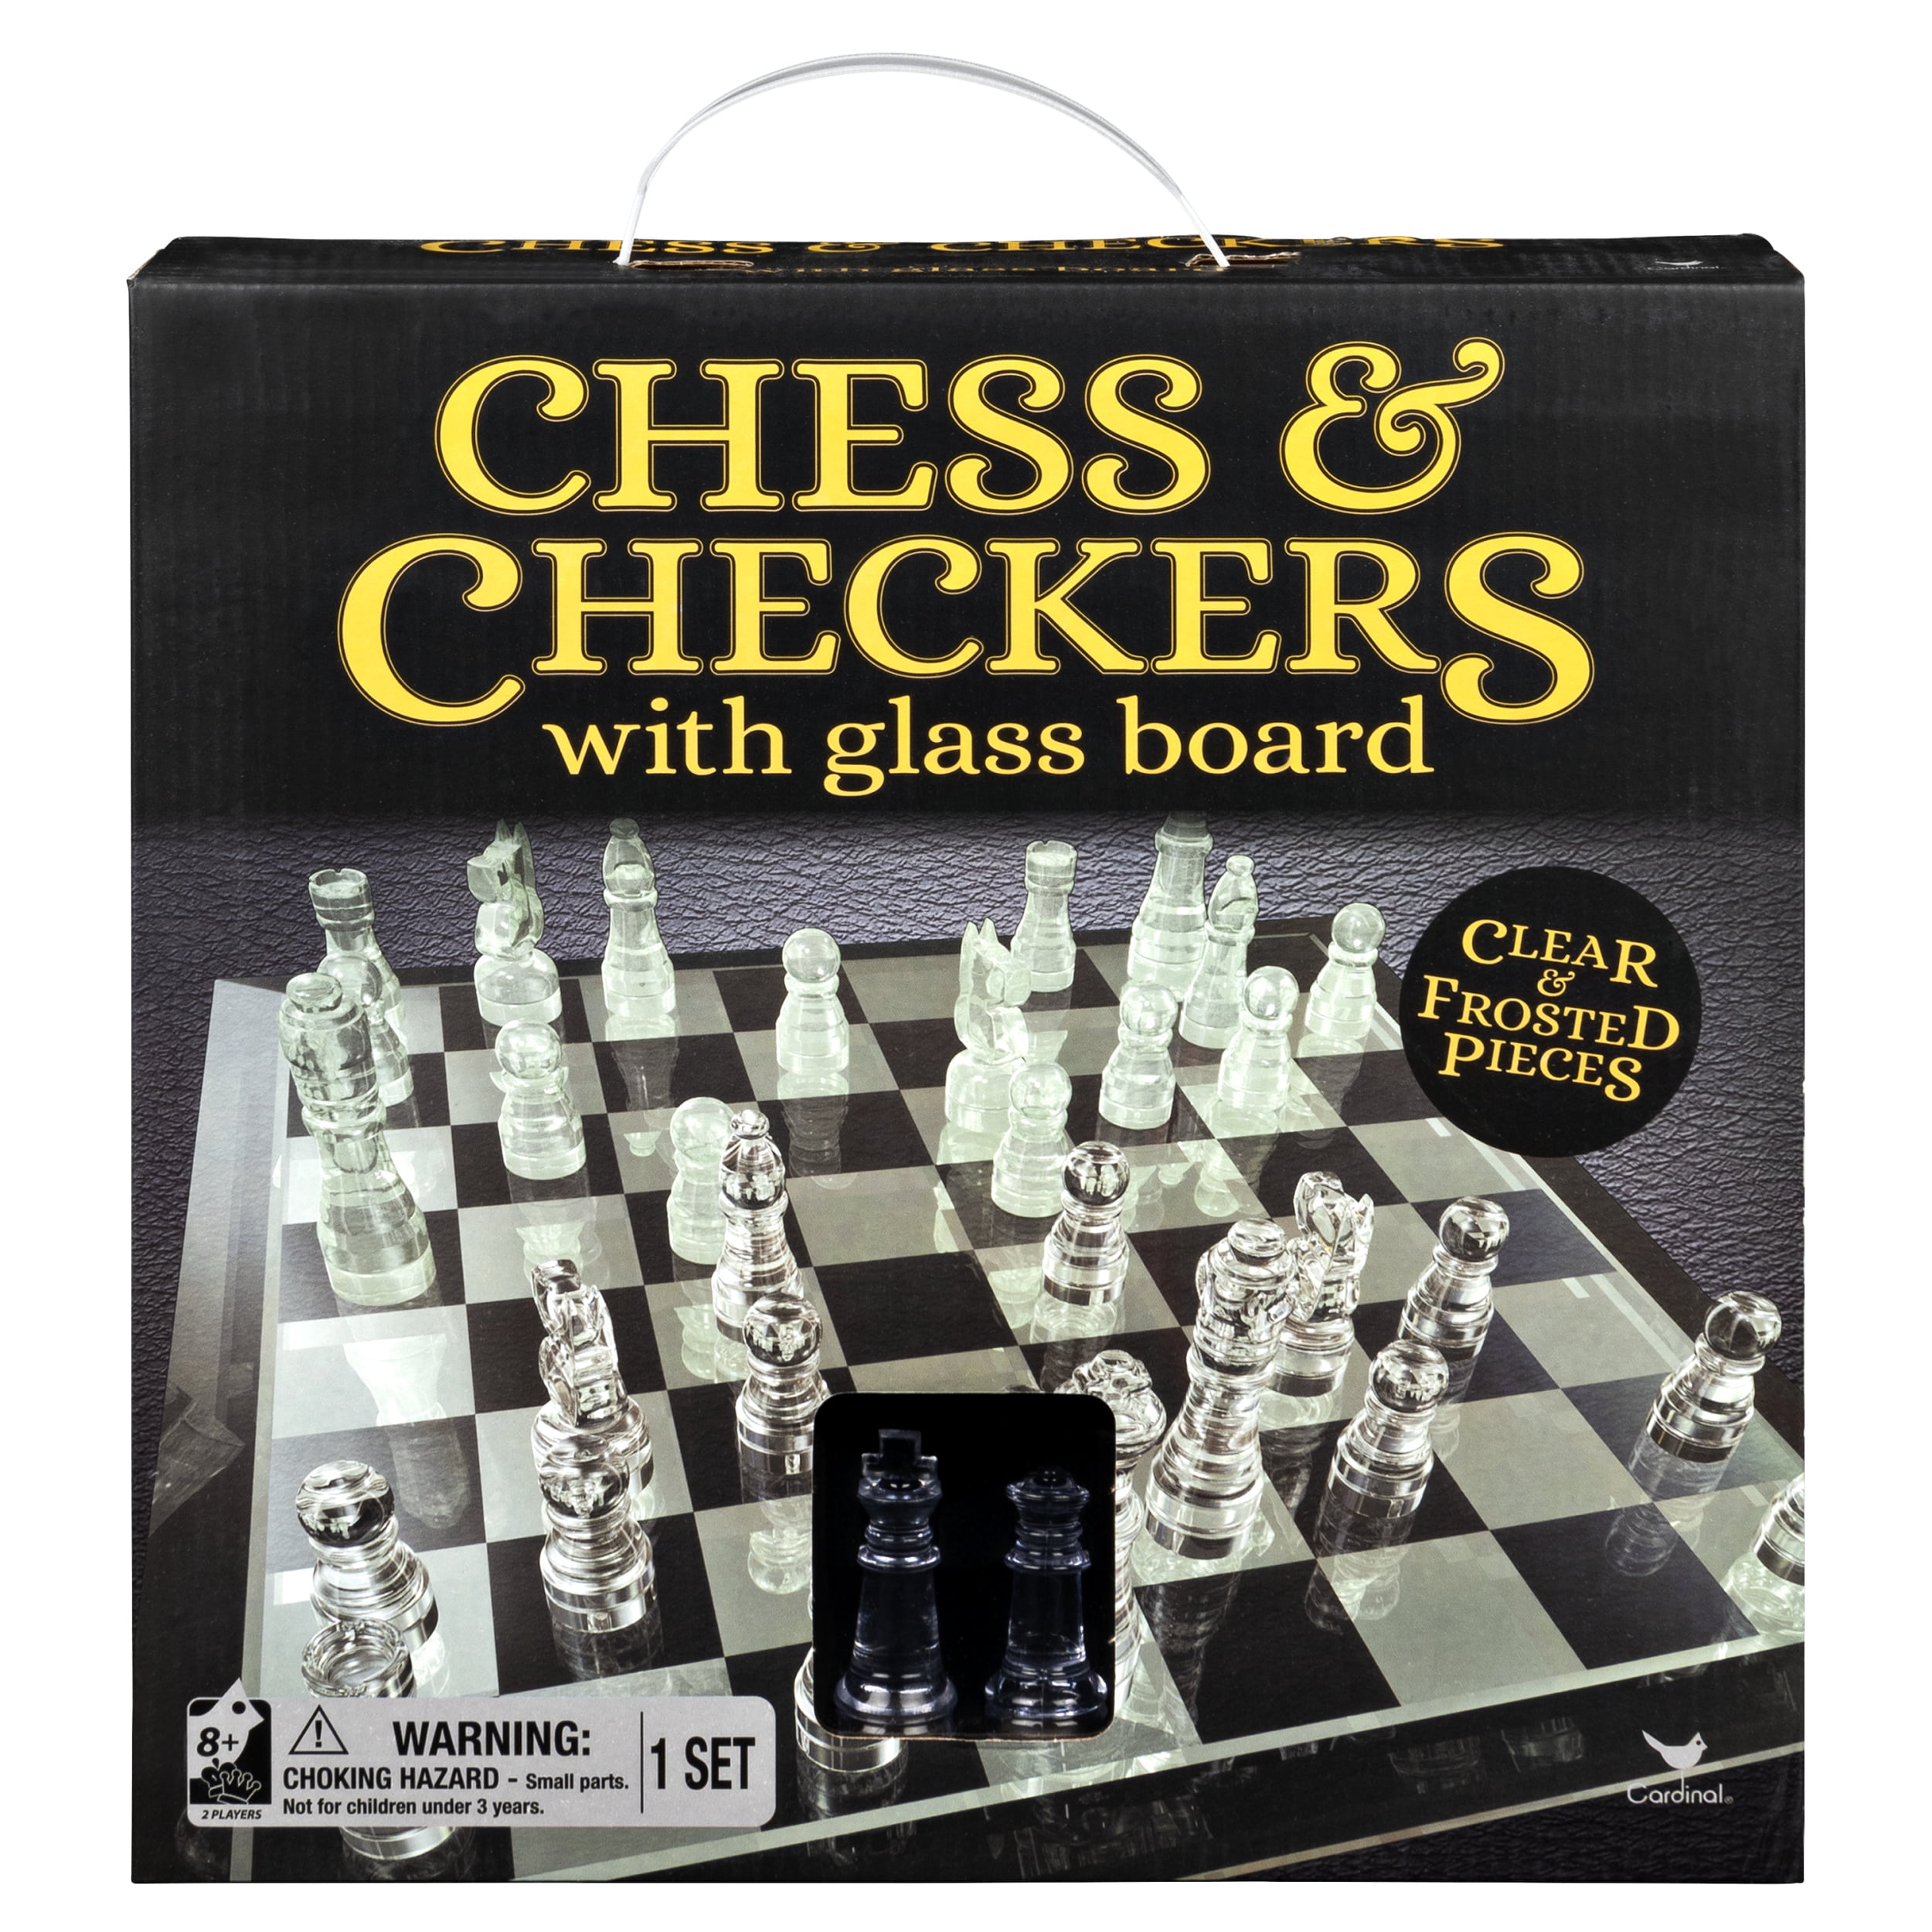 checkers toy catalogue 2018